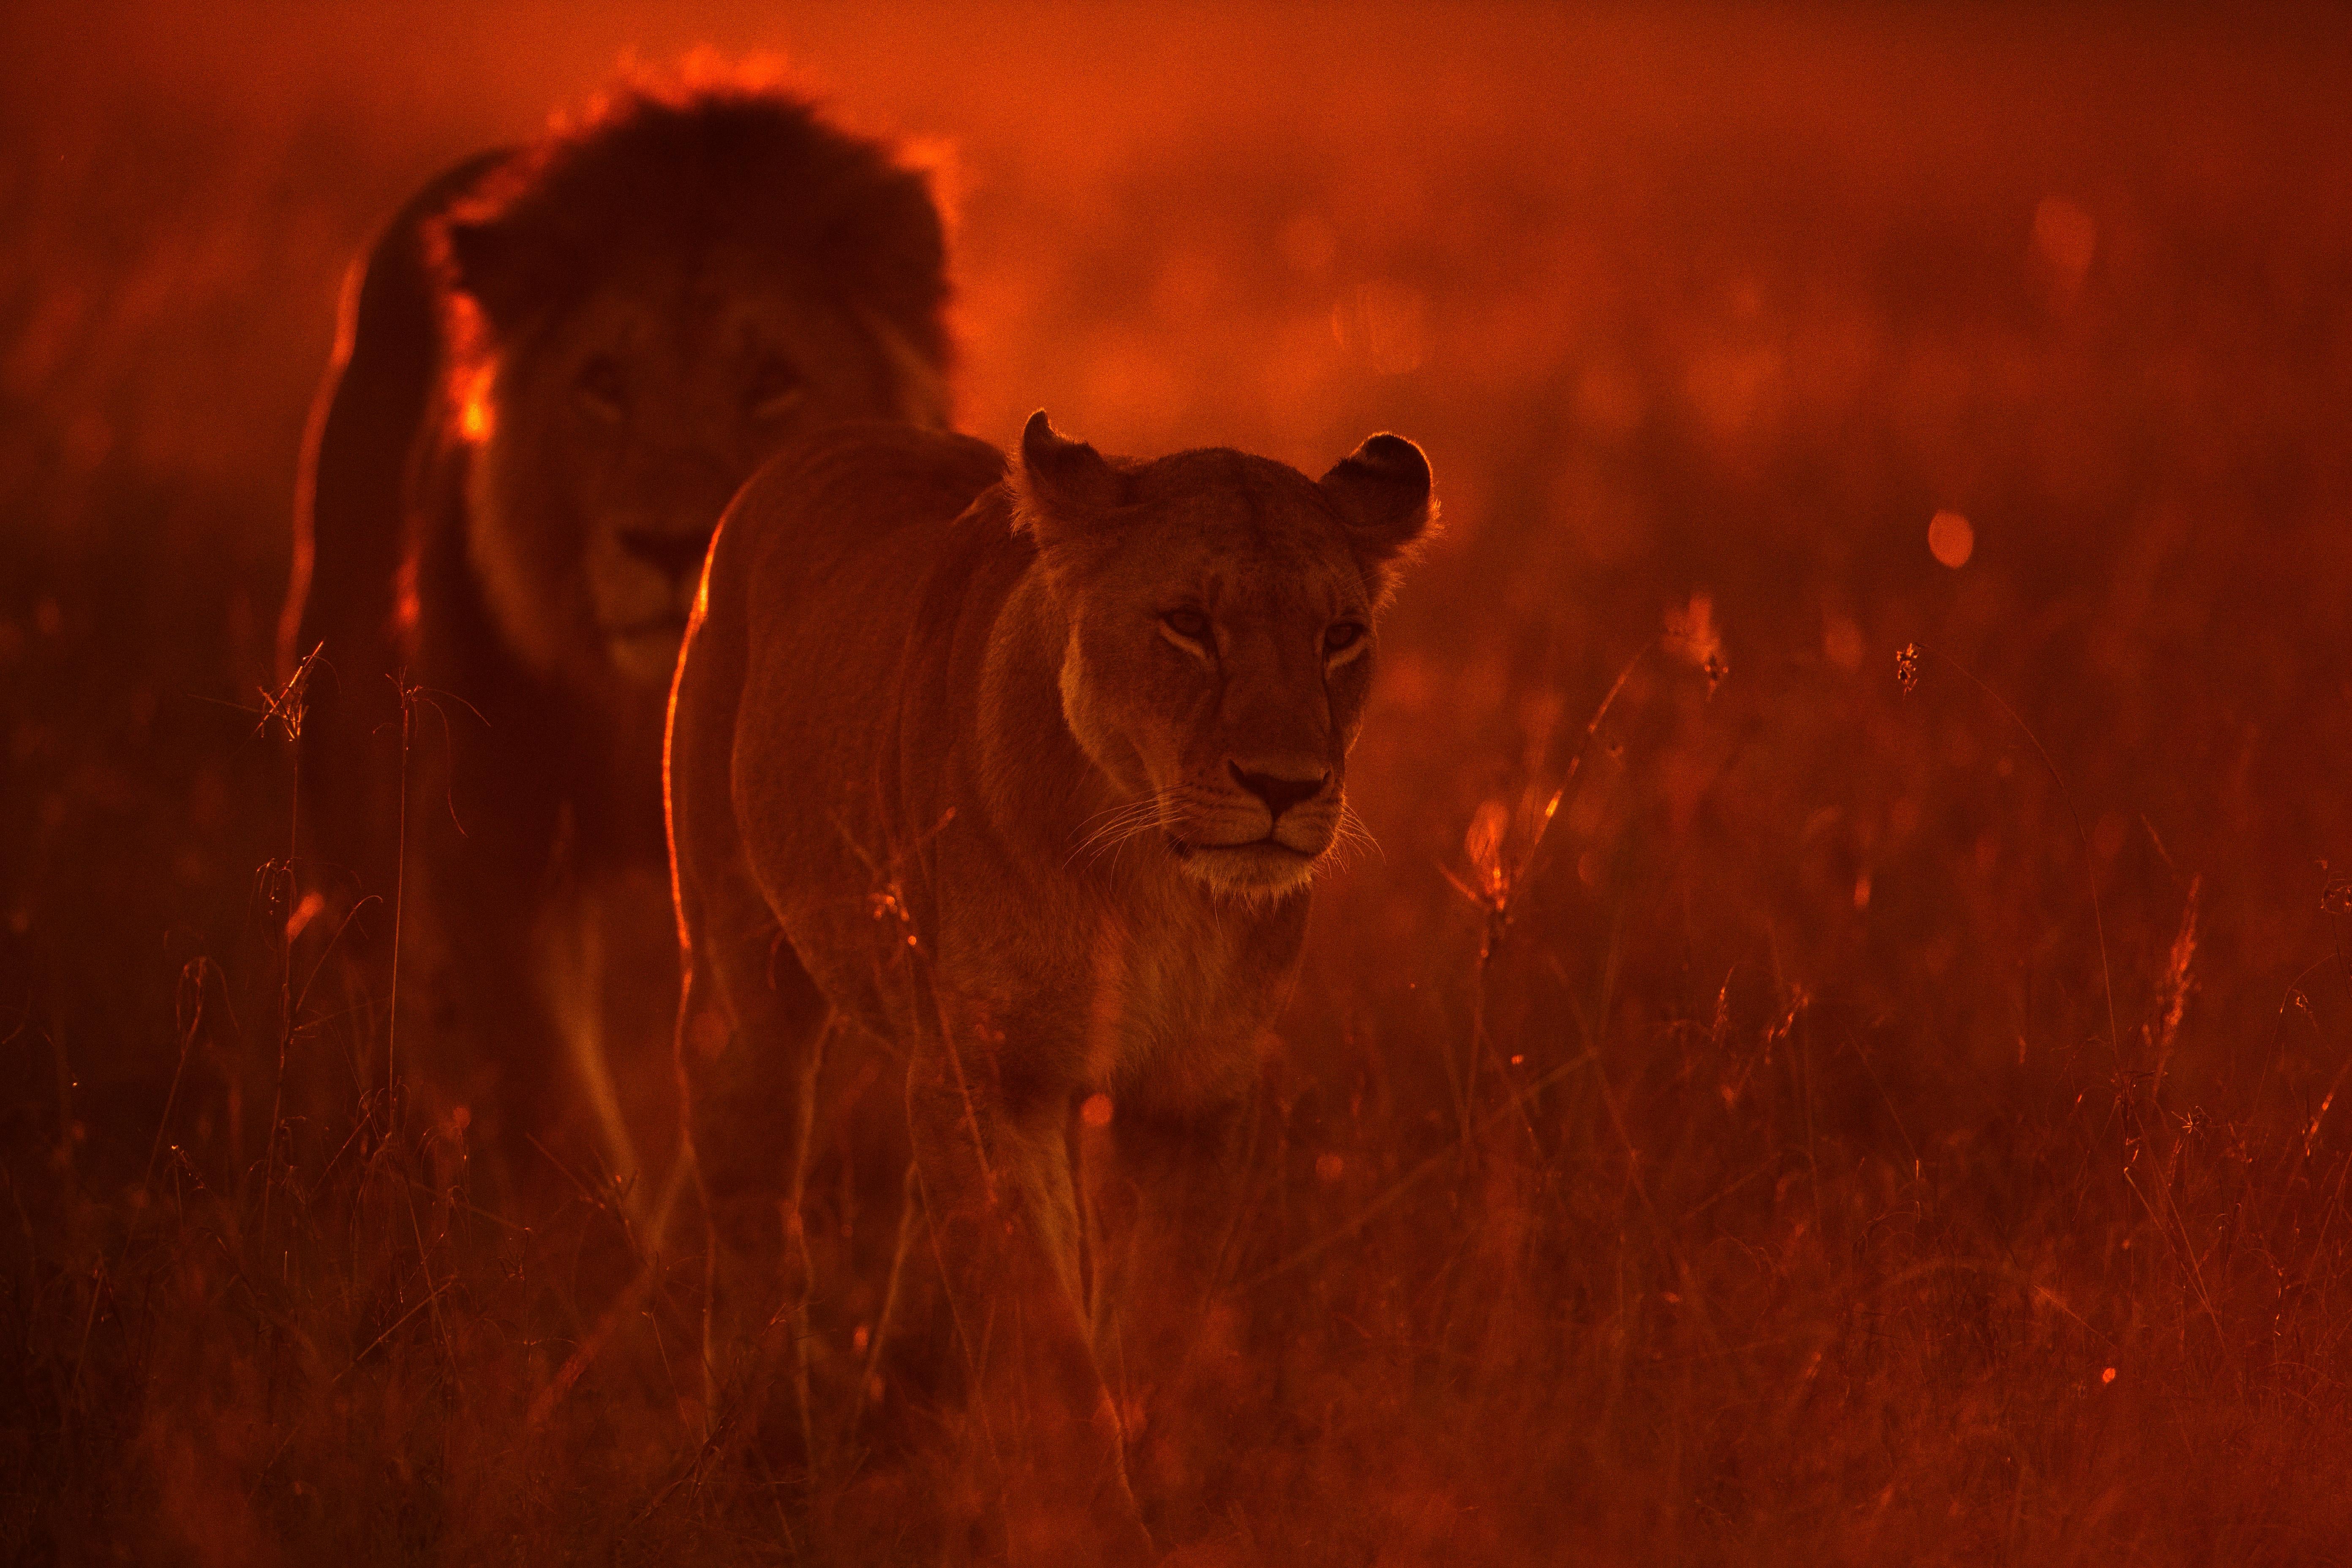 Aditya Dicky Singh Color Photograph - Animal Landscape Photograph Nature Wildlife African Lions Red Orange Sunset